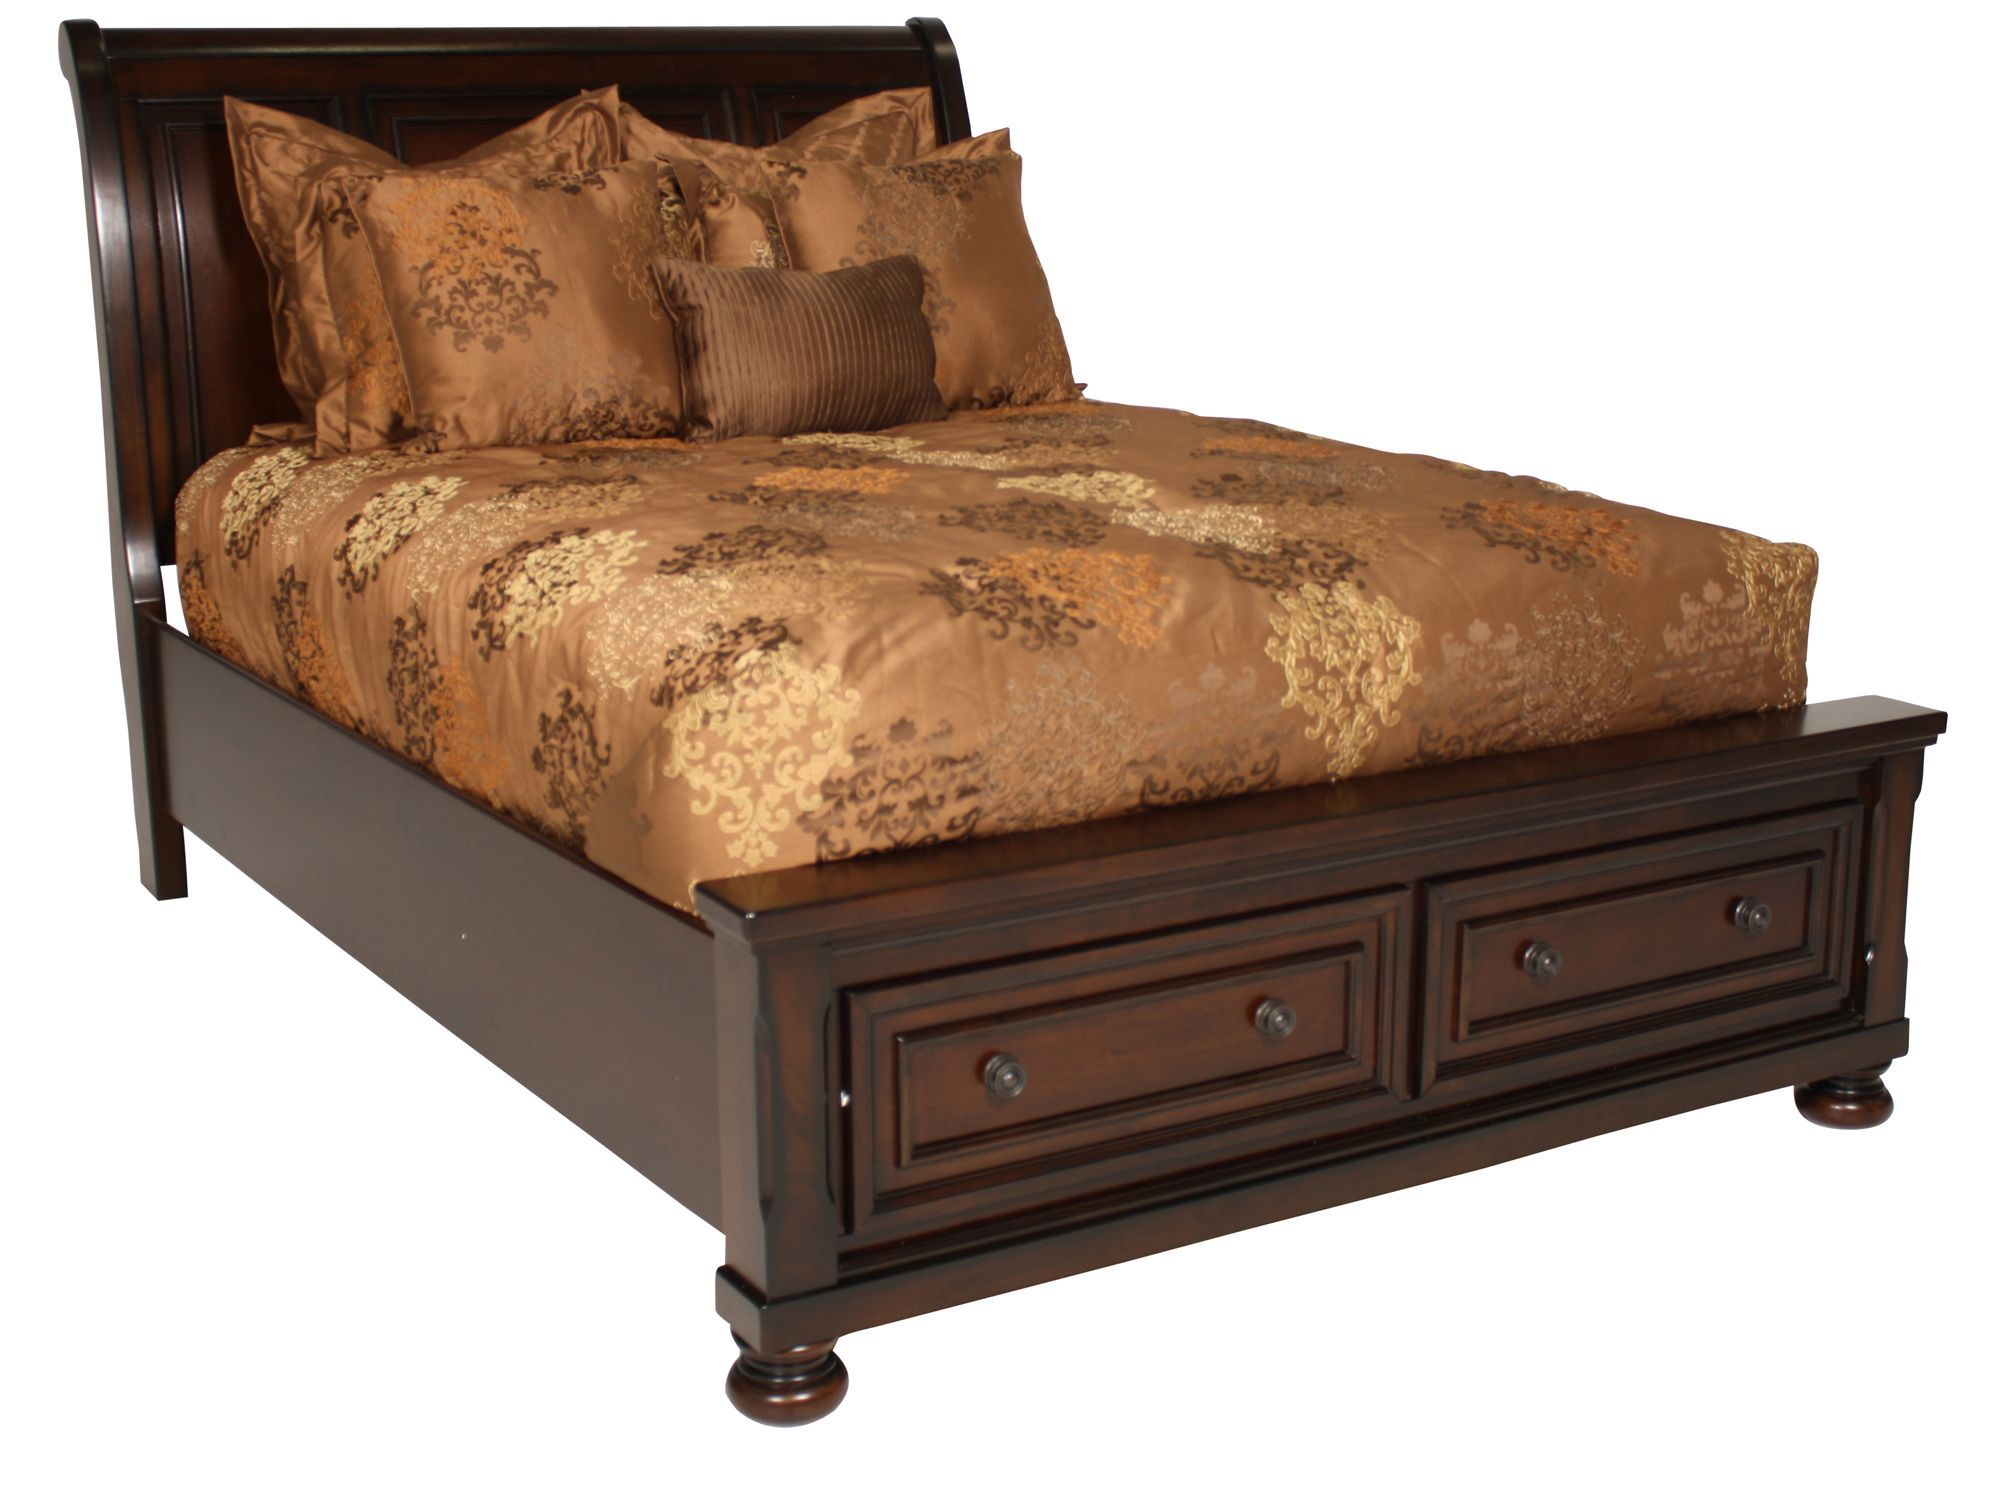 Ashely Porter King Size Sleigh Bed With Storage Decor regarding dimensions 2000 X 1500